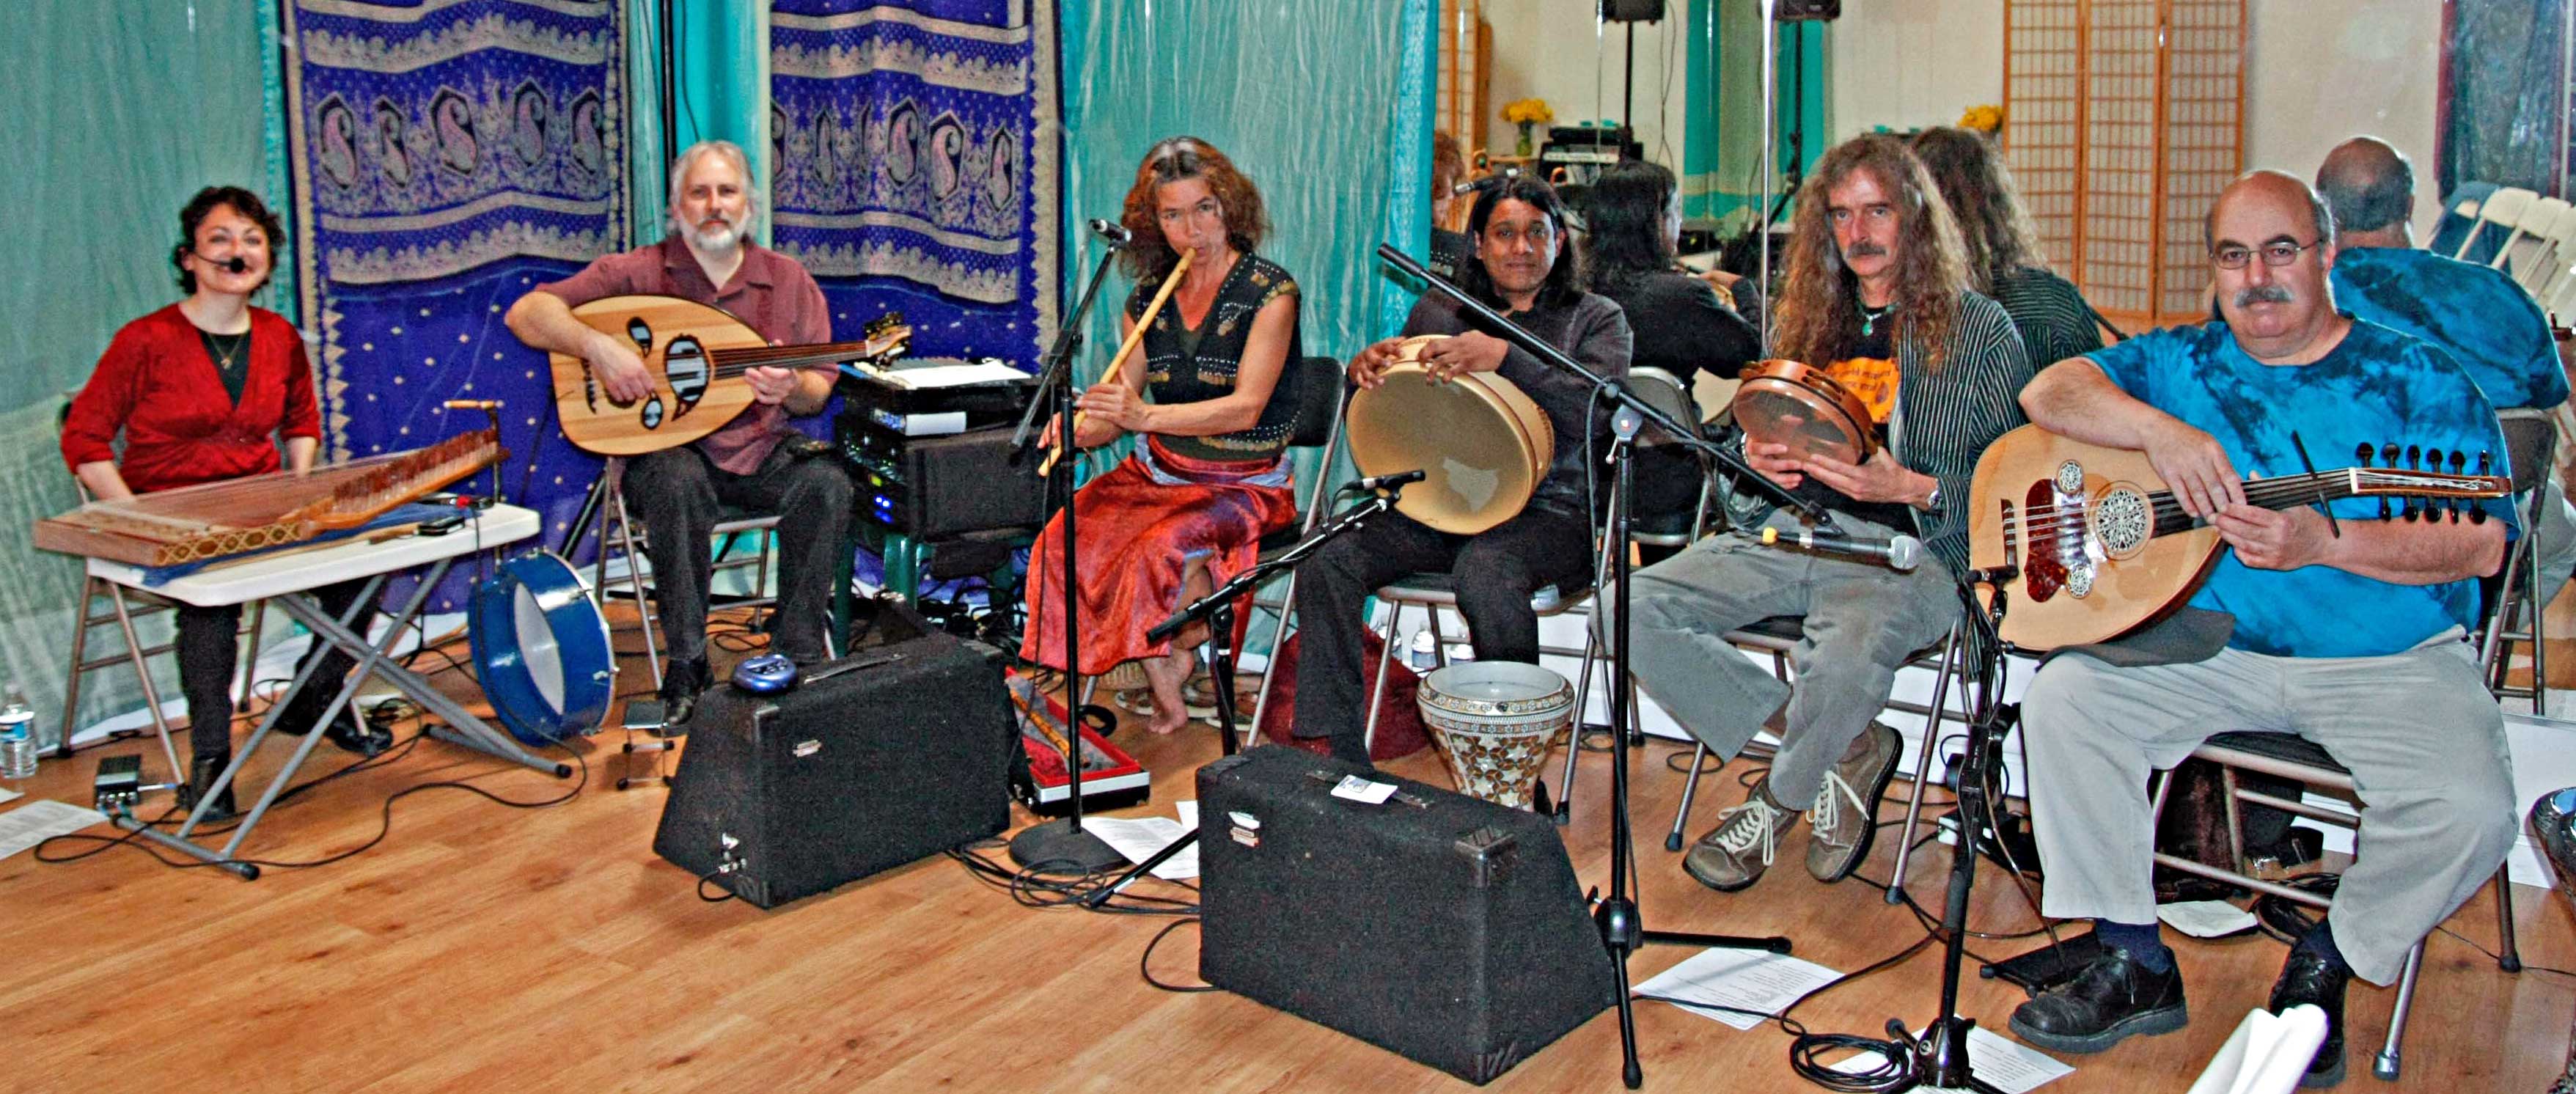 Al 'Azifoon performing with our friends Mark Bell and Ling Shien of the band Helm in April 2009 at a hafla hostessed by Dhyanis in San Anselmo, CA